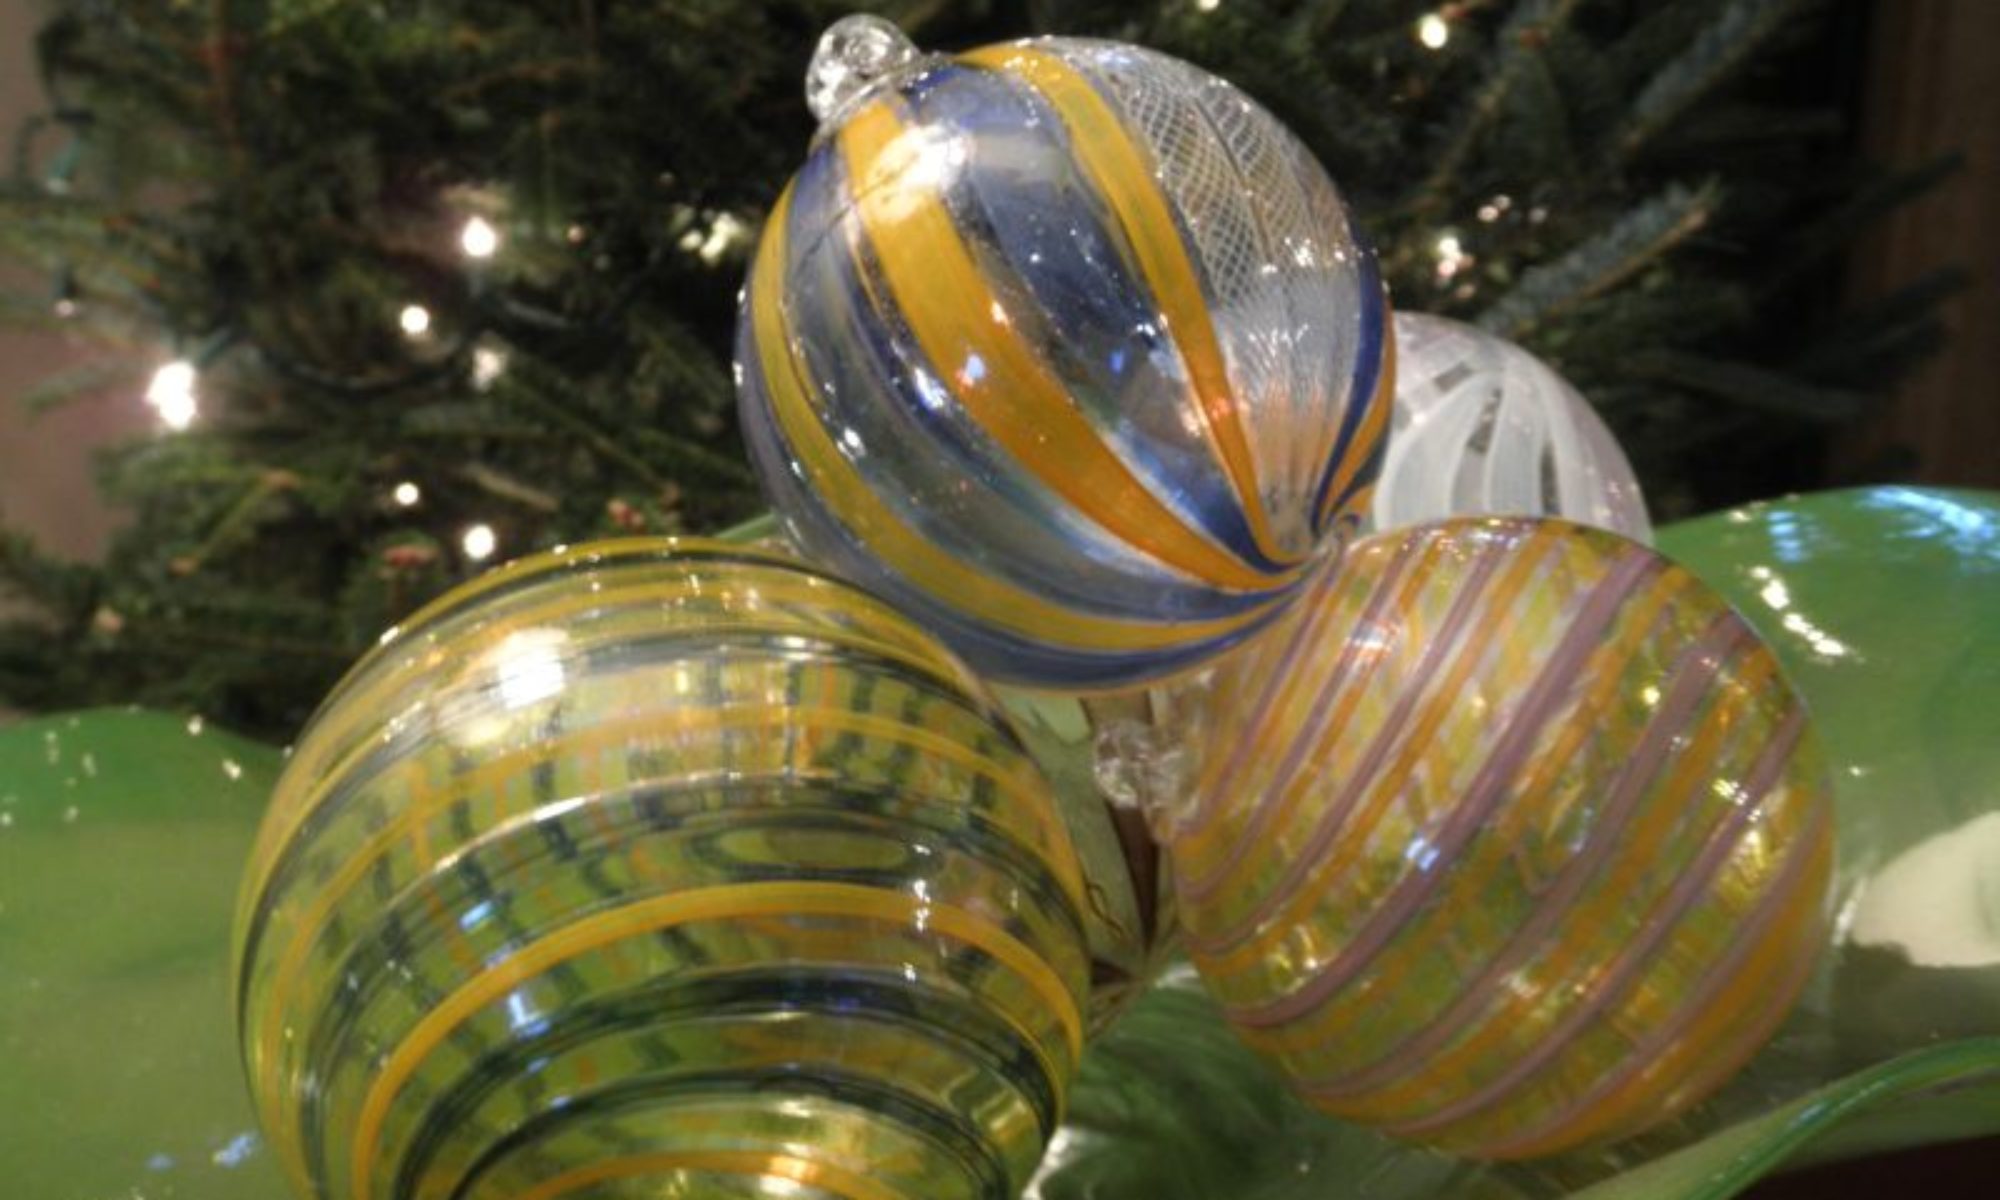 Glassblowing Workshops and Gift Certificates on sale! 65% off code "endof21" 